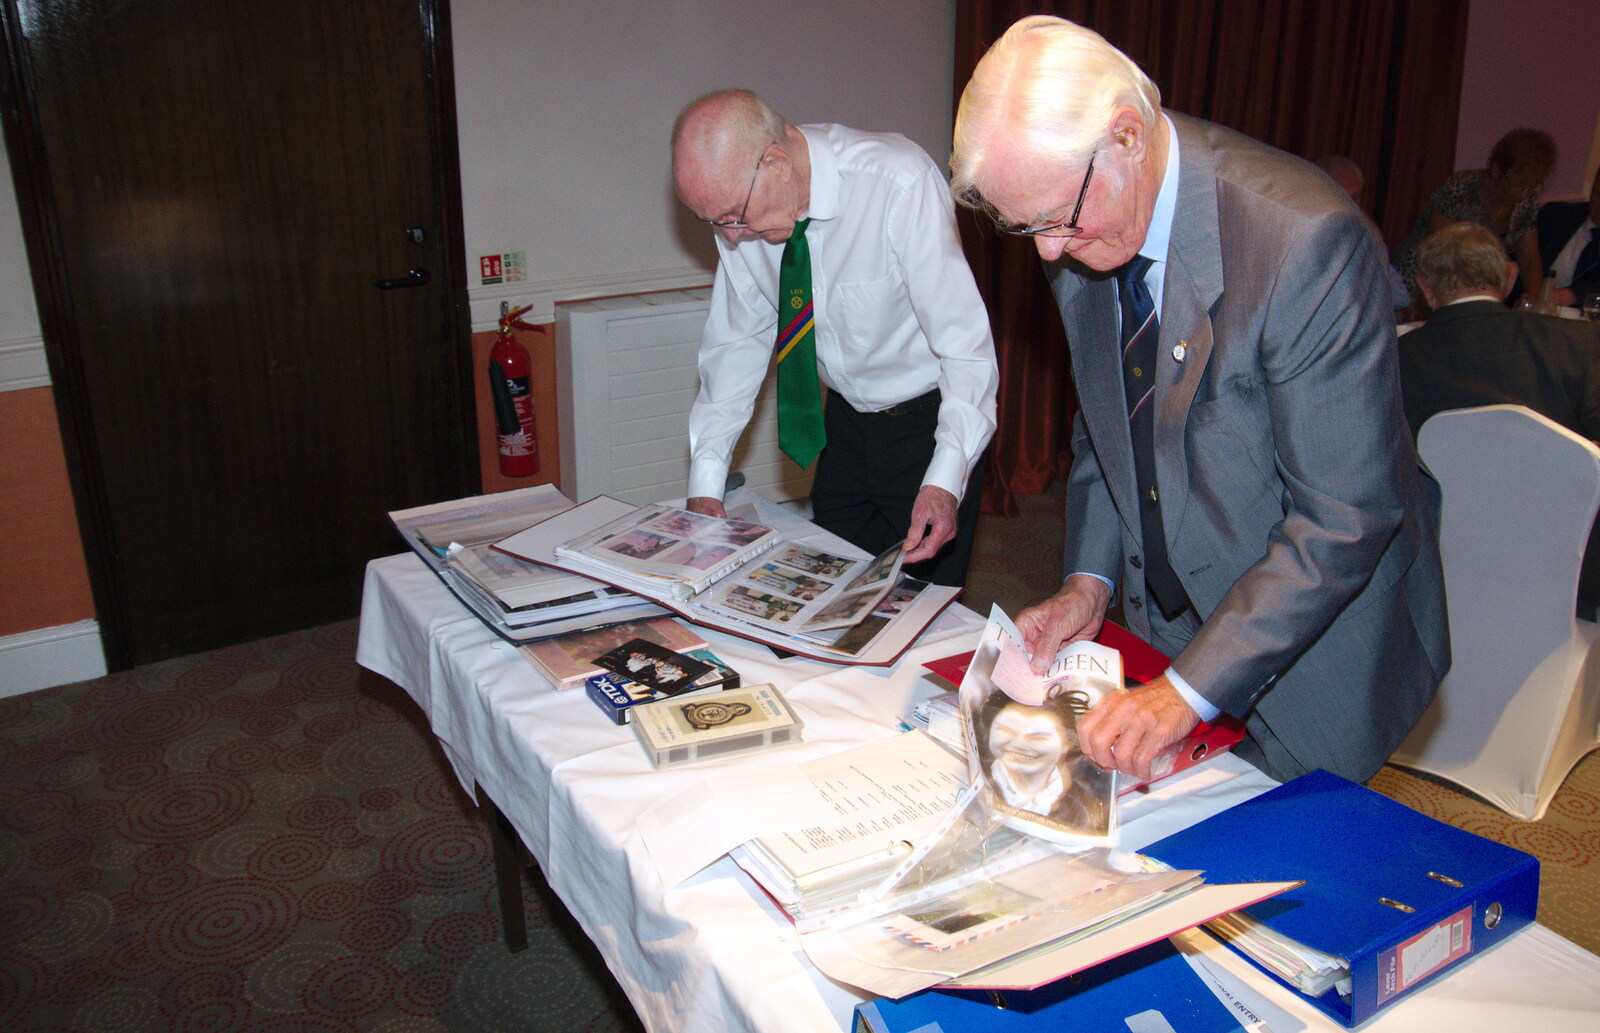 Some of the history of the 69th is inspected from Kenilworth Castle and the 69th Entry Reunion Dinner, Stratford, Warwickshire - 14th September 2019